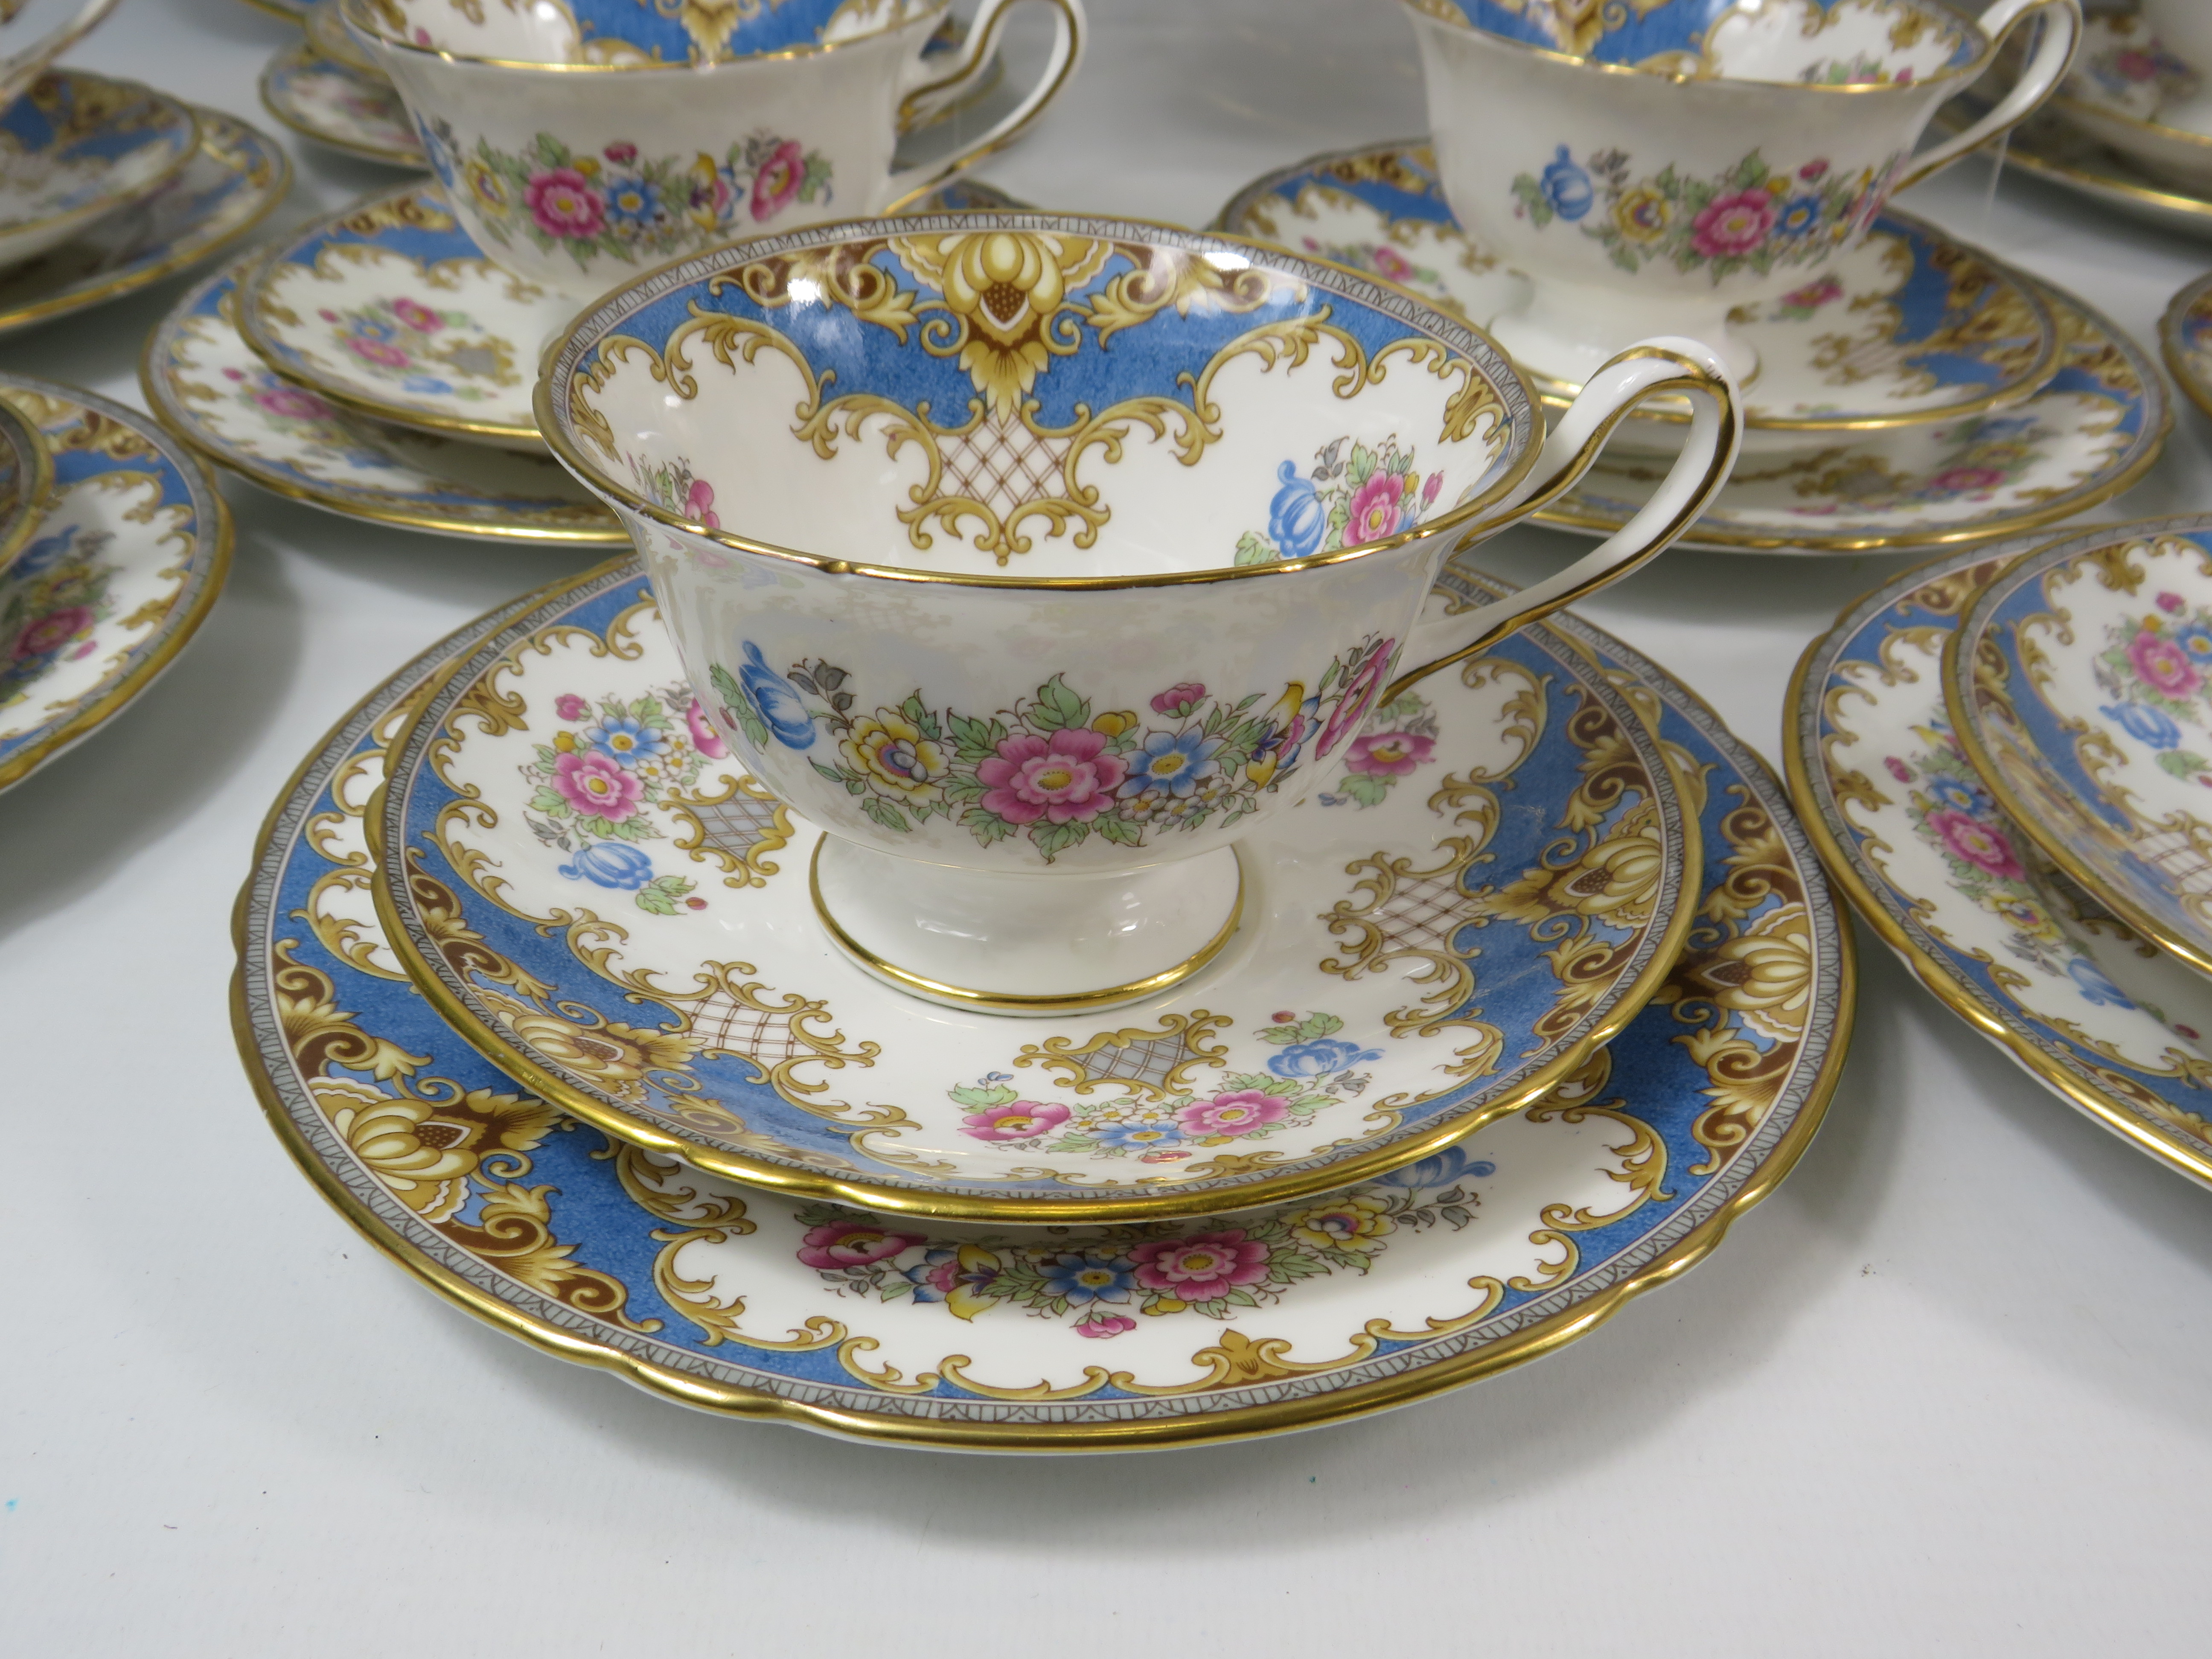 42 Pieces of Shelley Sheraton Teaset, 2 cake plates, Teapot, 12 cups, saucers and side plates plus - Image 4 of 8